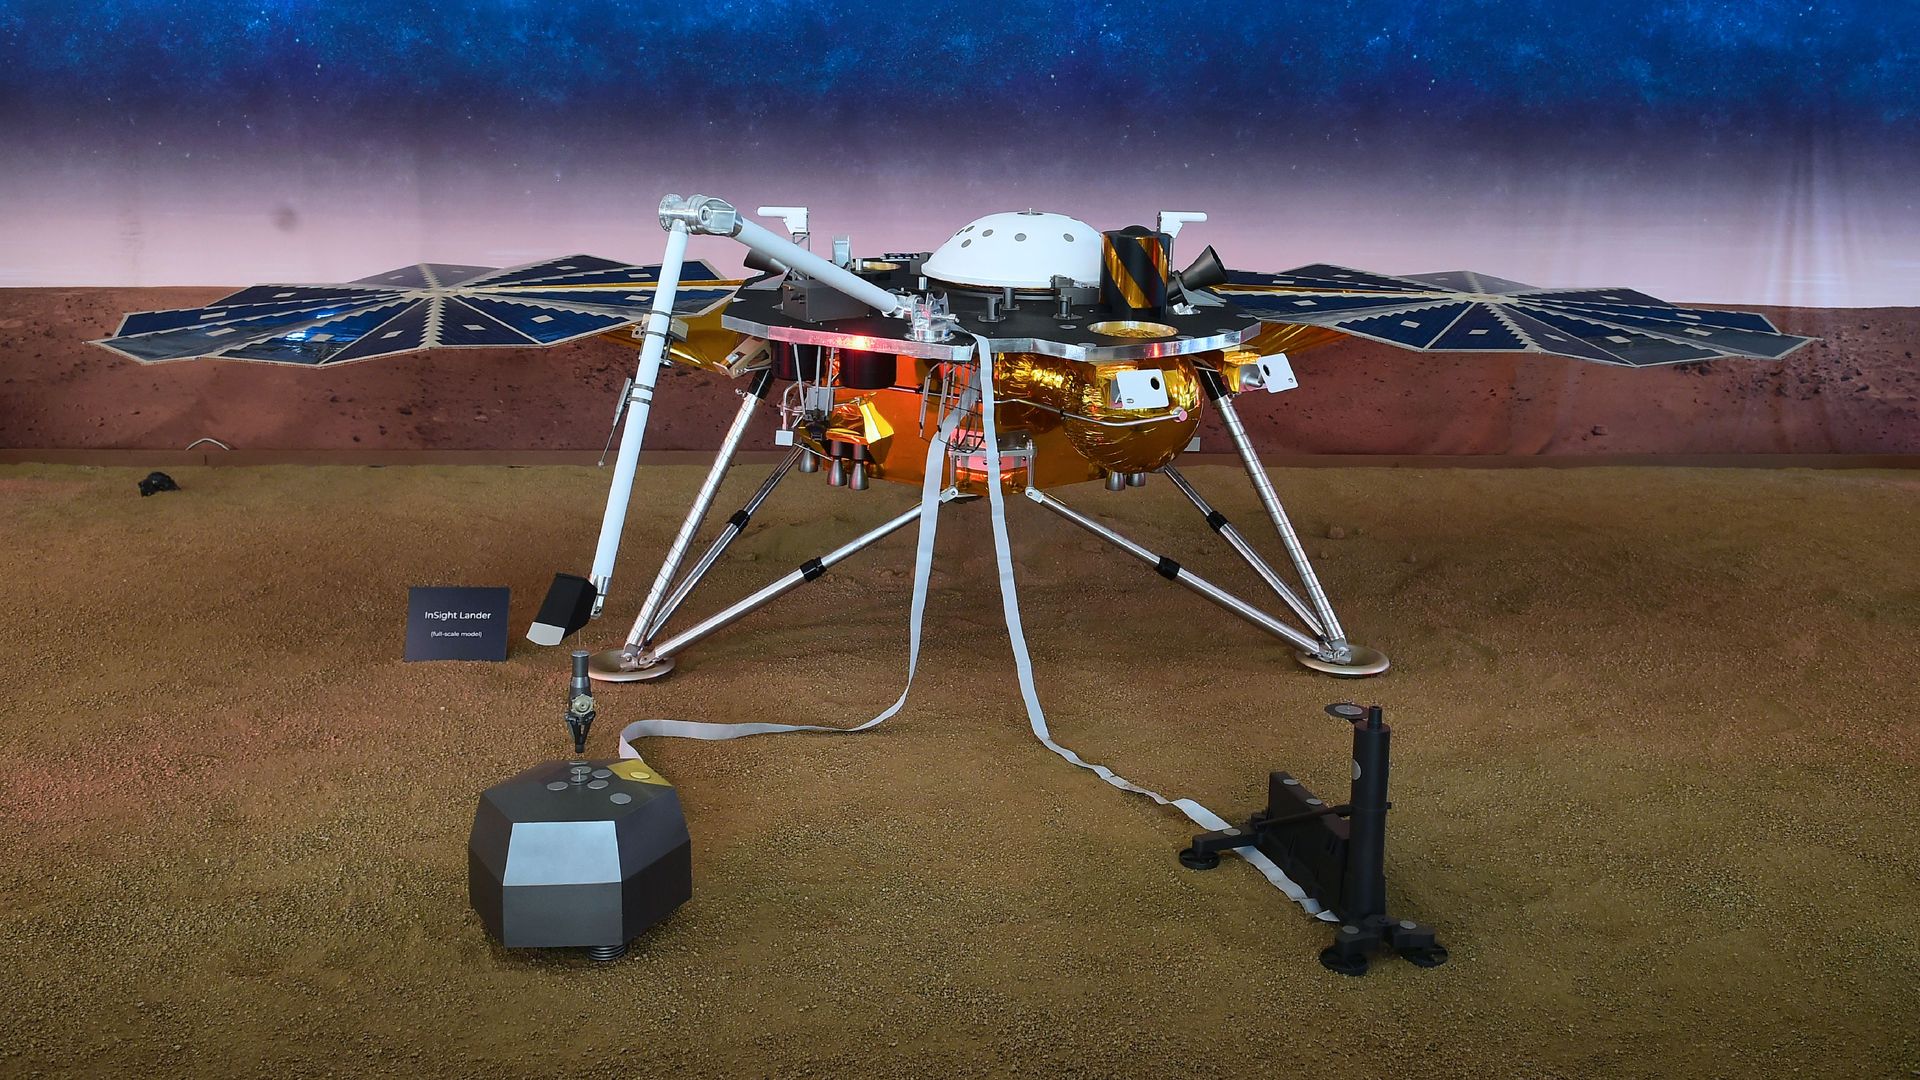 A replica of the InSight Mars Lander is on display at the NASA Jet Propulsion Laboratory (JPL) in Pasadena, California 